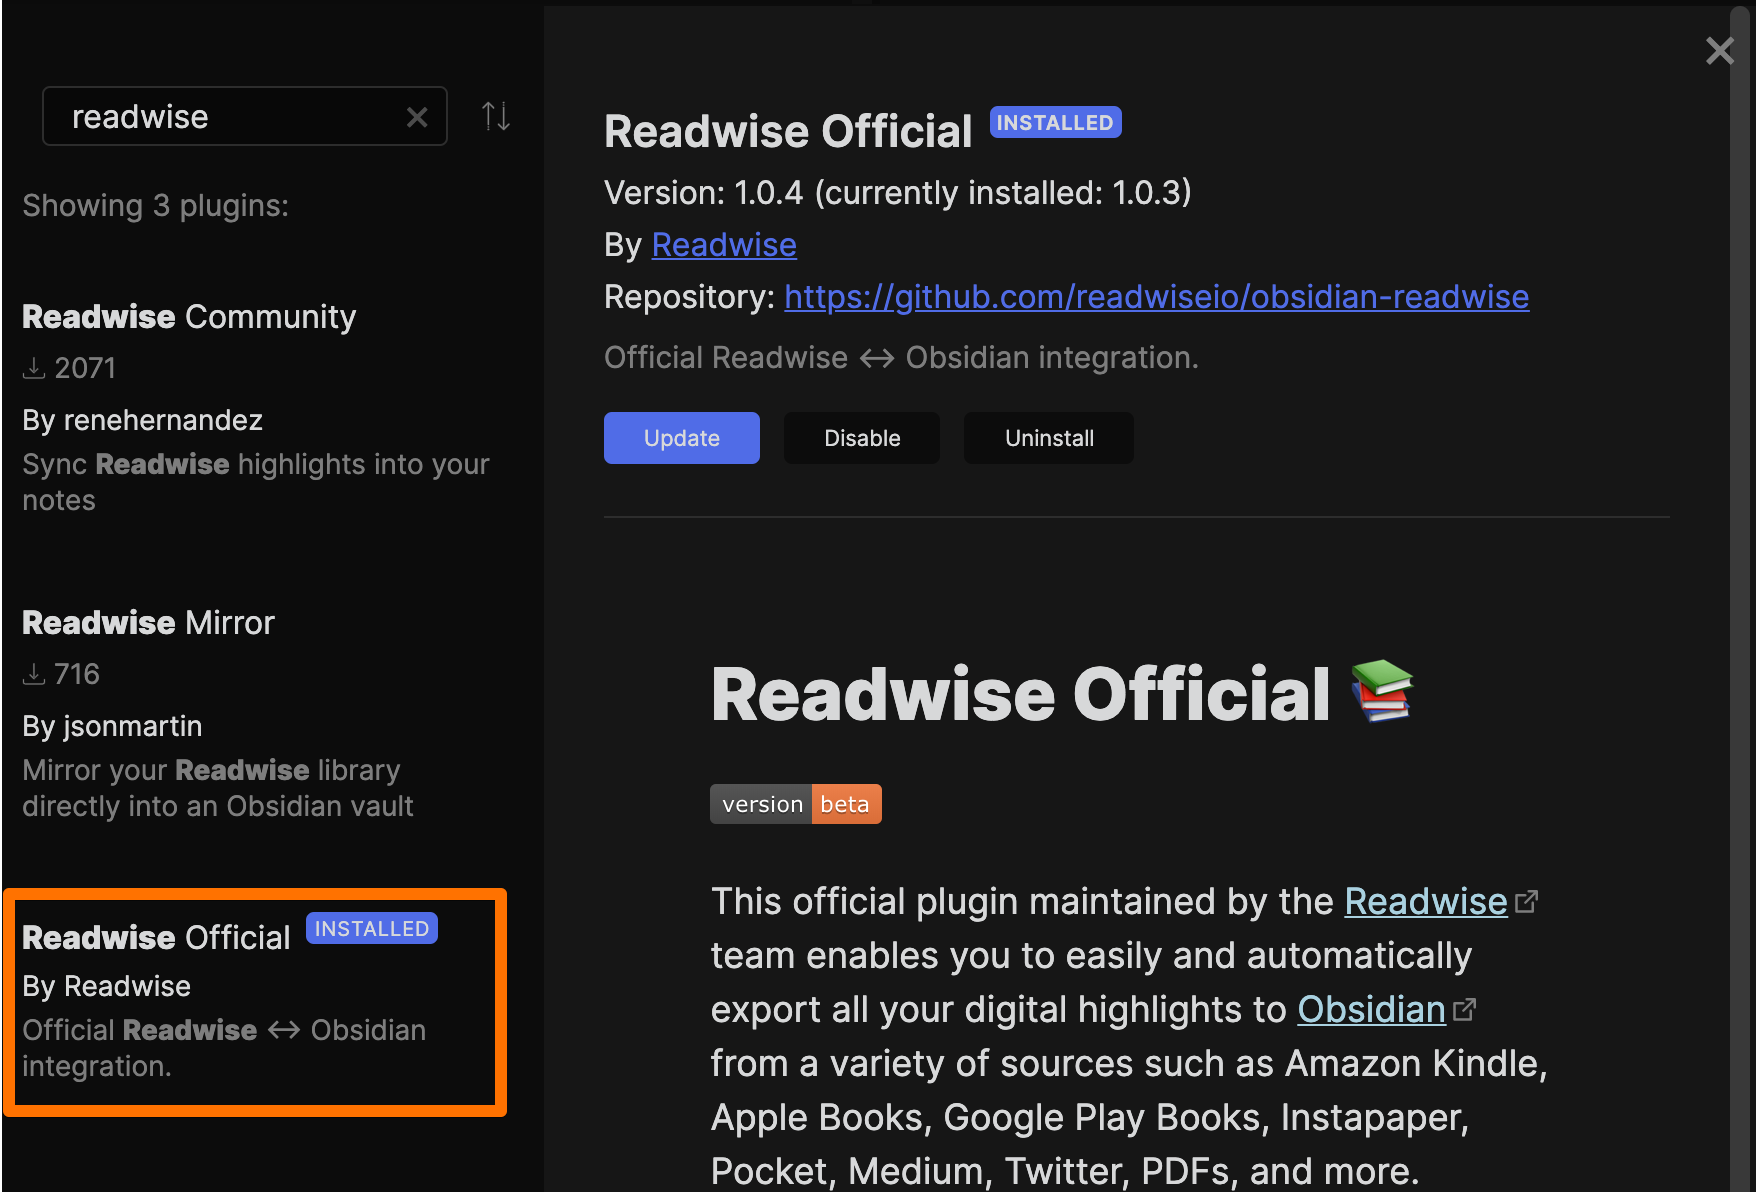 Screenshot of the Readwise Official plugin within Obsidian